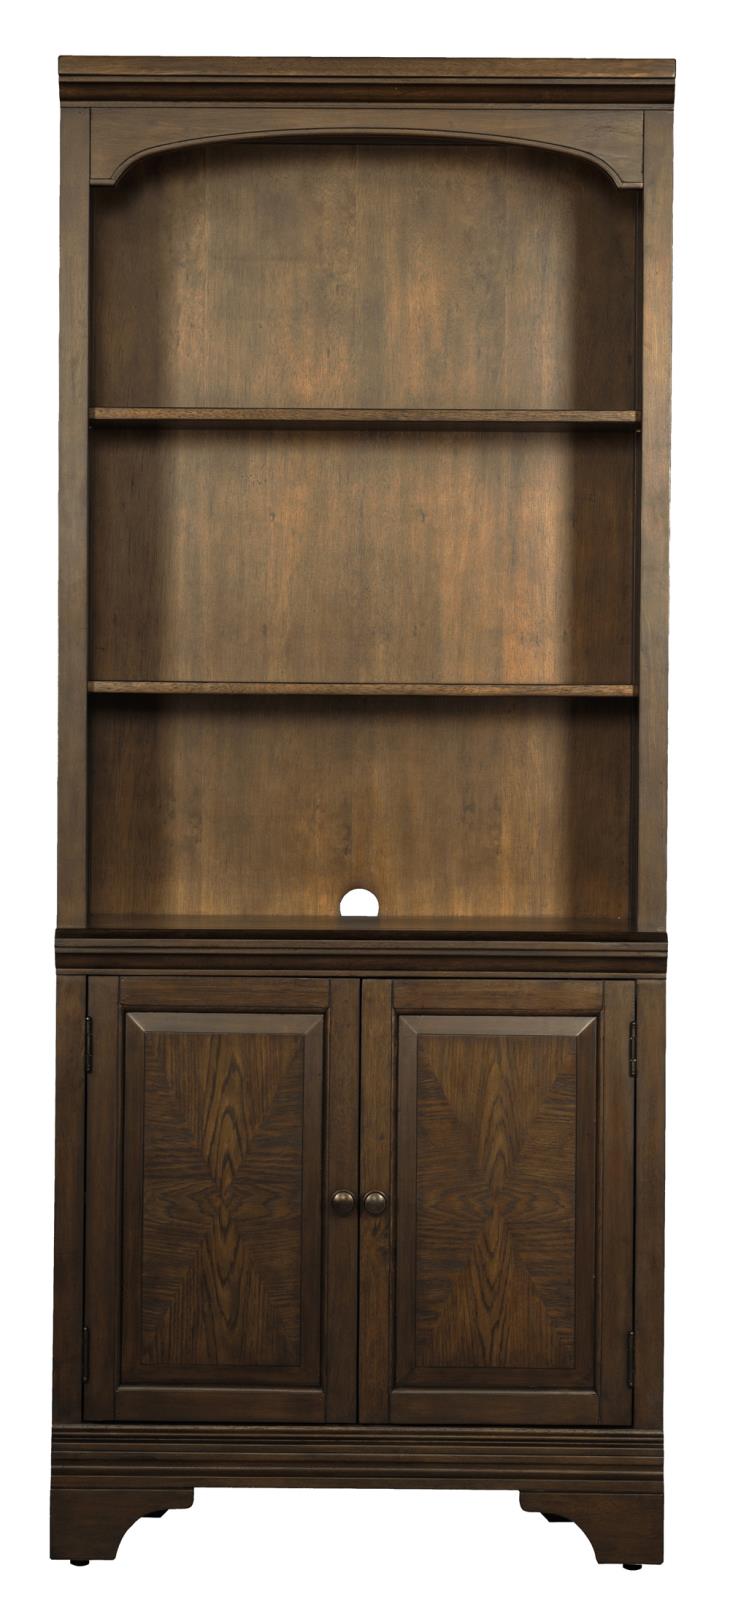 Hartshill Bookcase with Cabinet Burnished Oak - What A Room